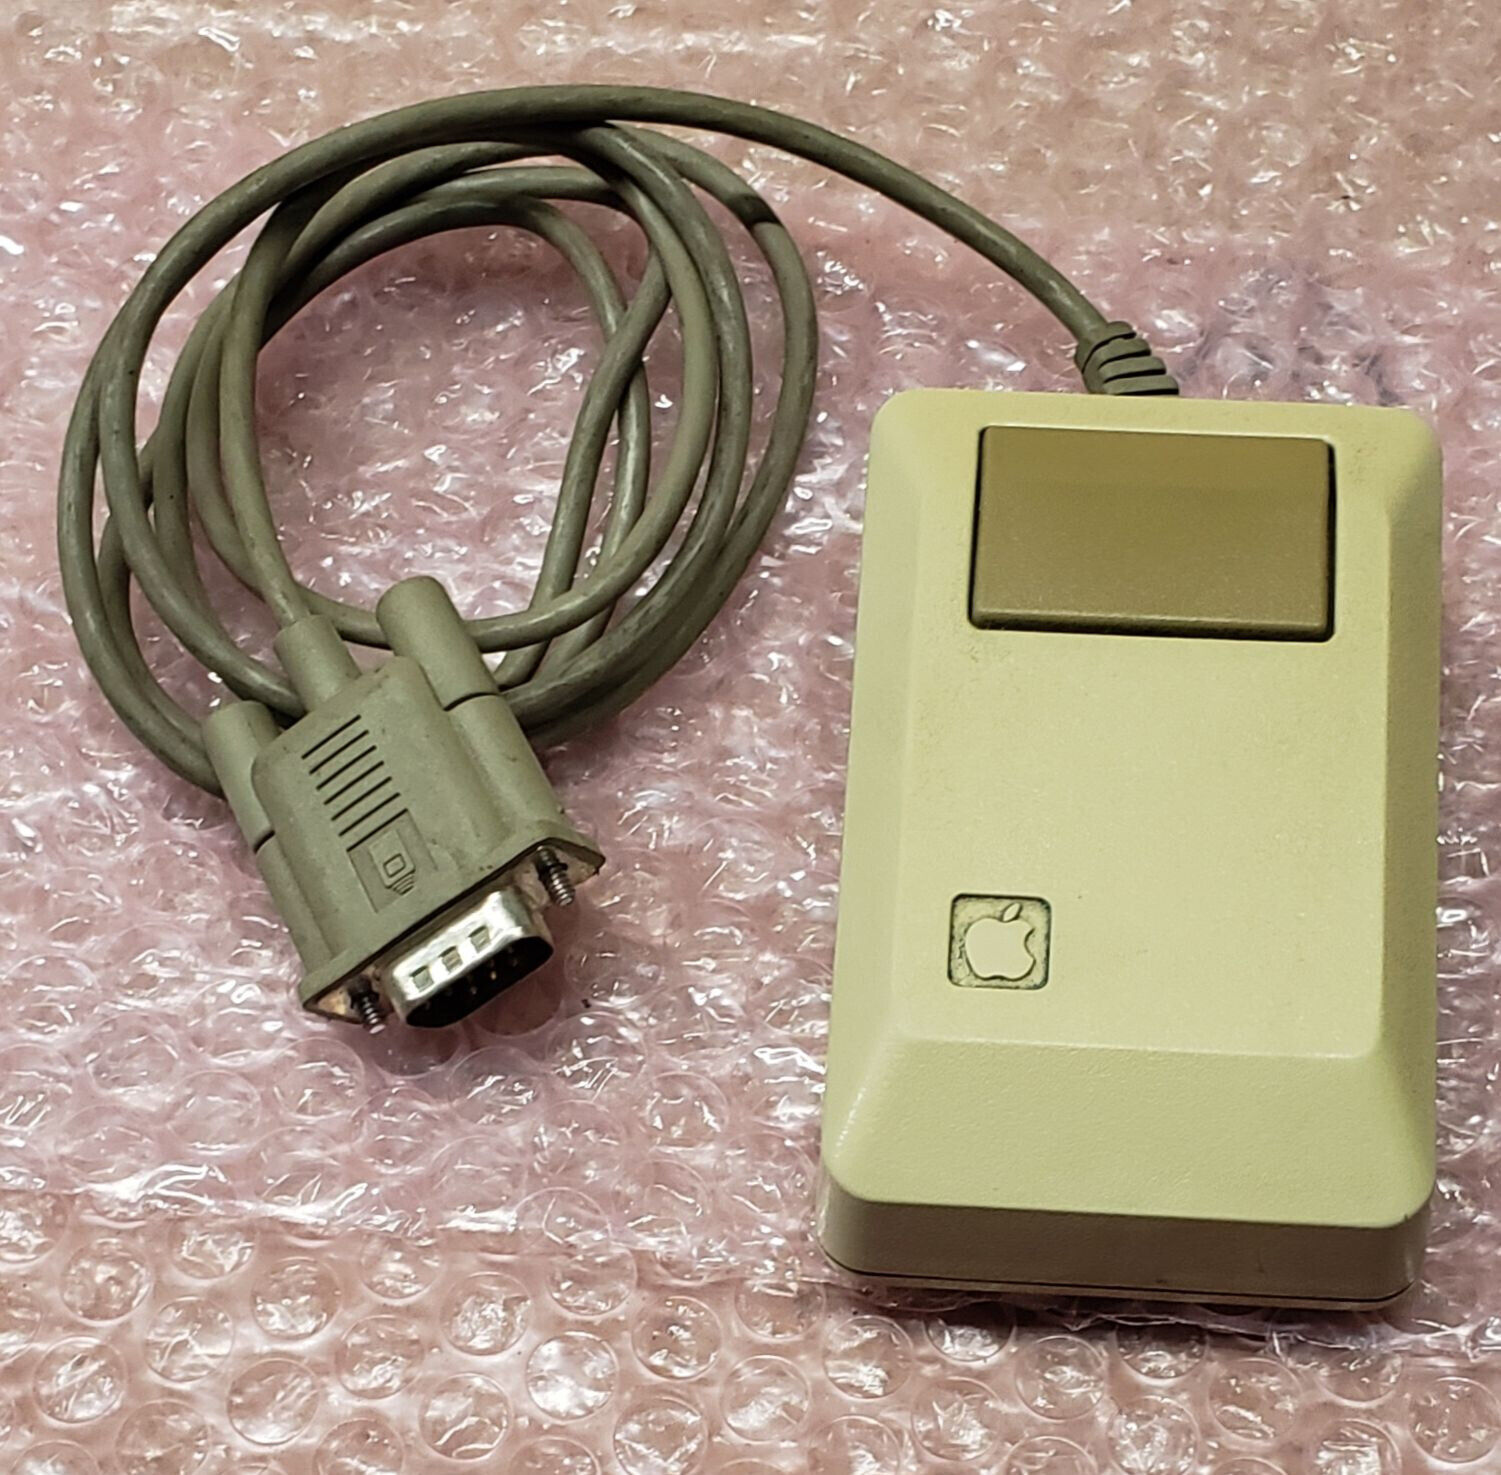 Vintage Apple M0100 mouse, DB9 cable, for Macintosh 128/512/Plus or Apple IIc